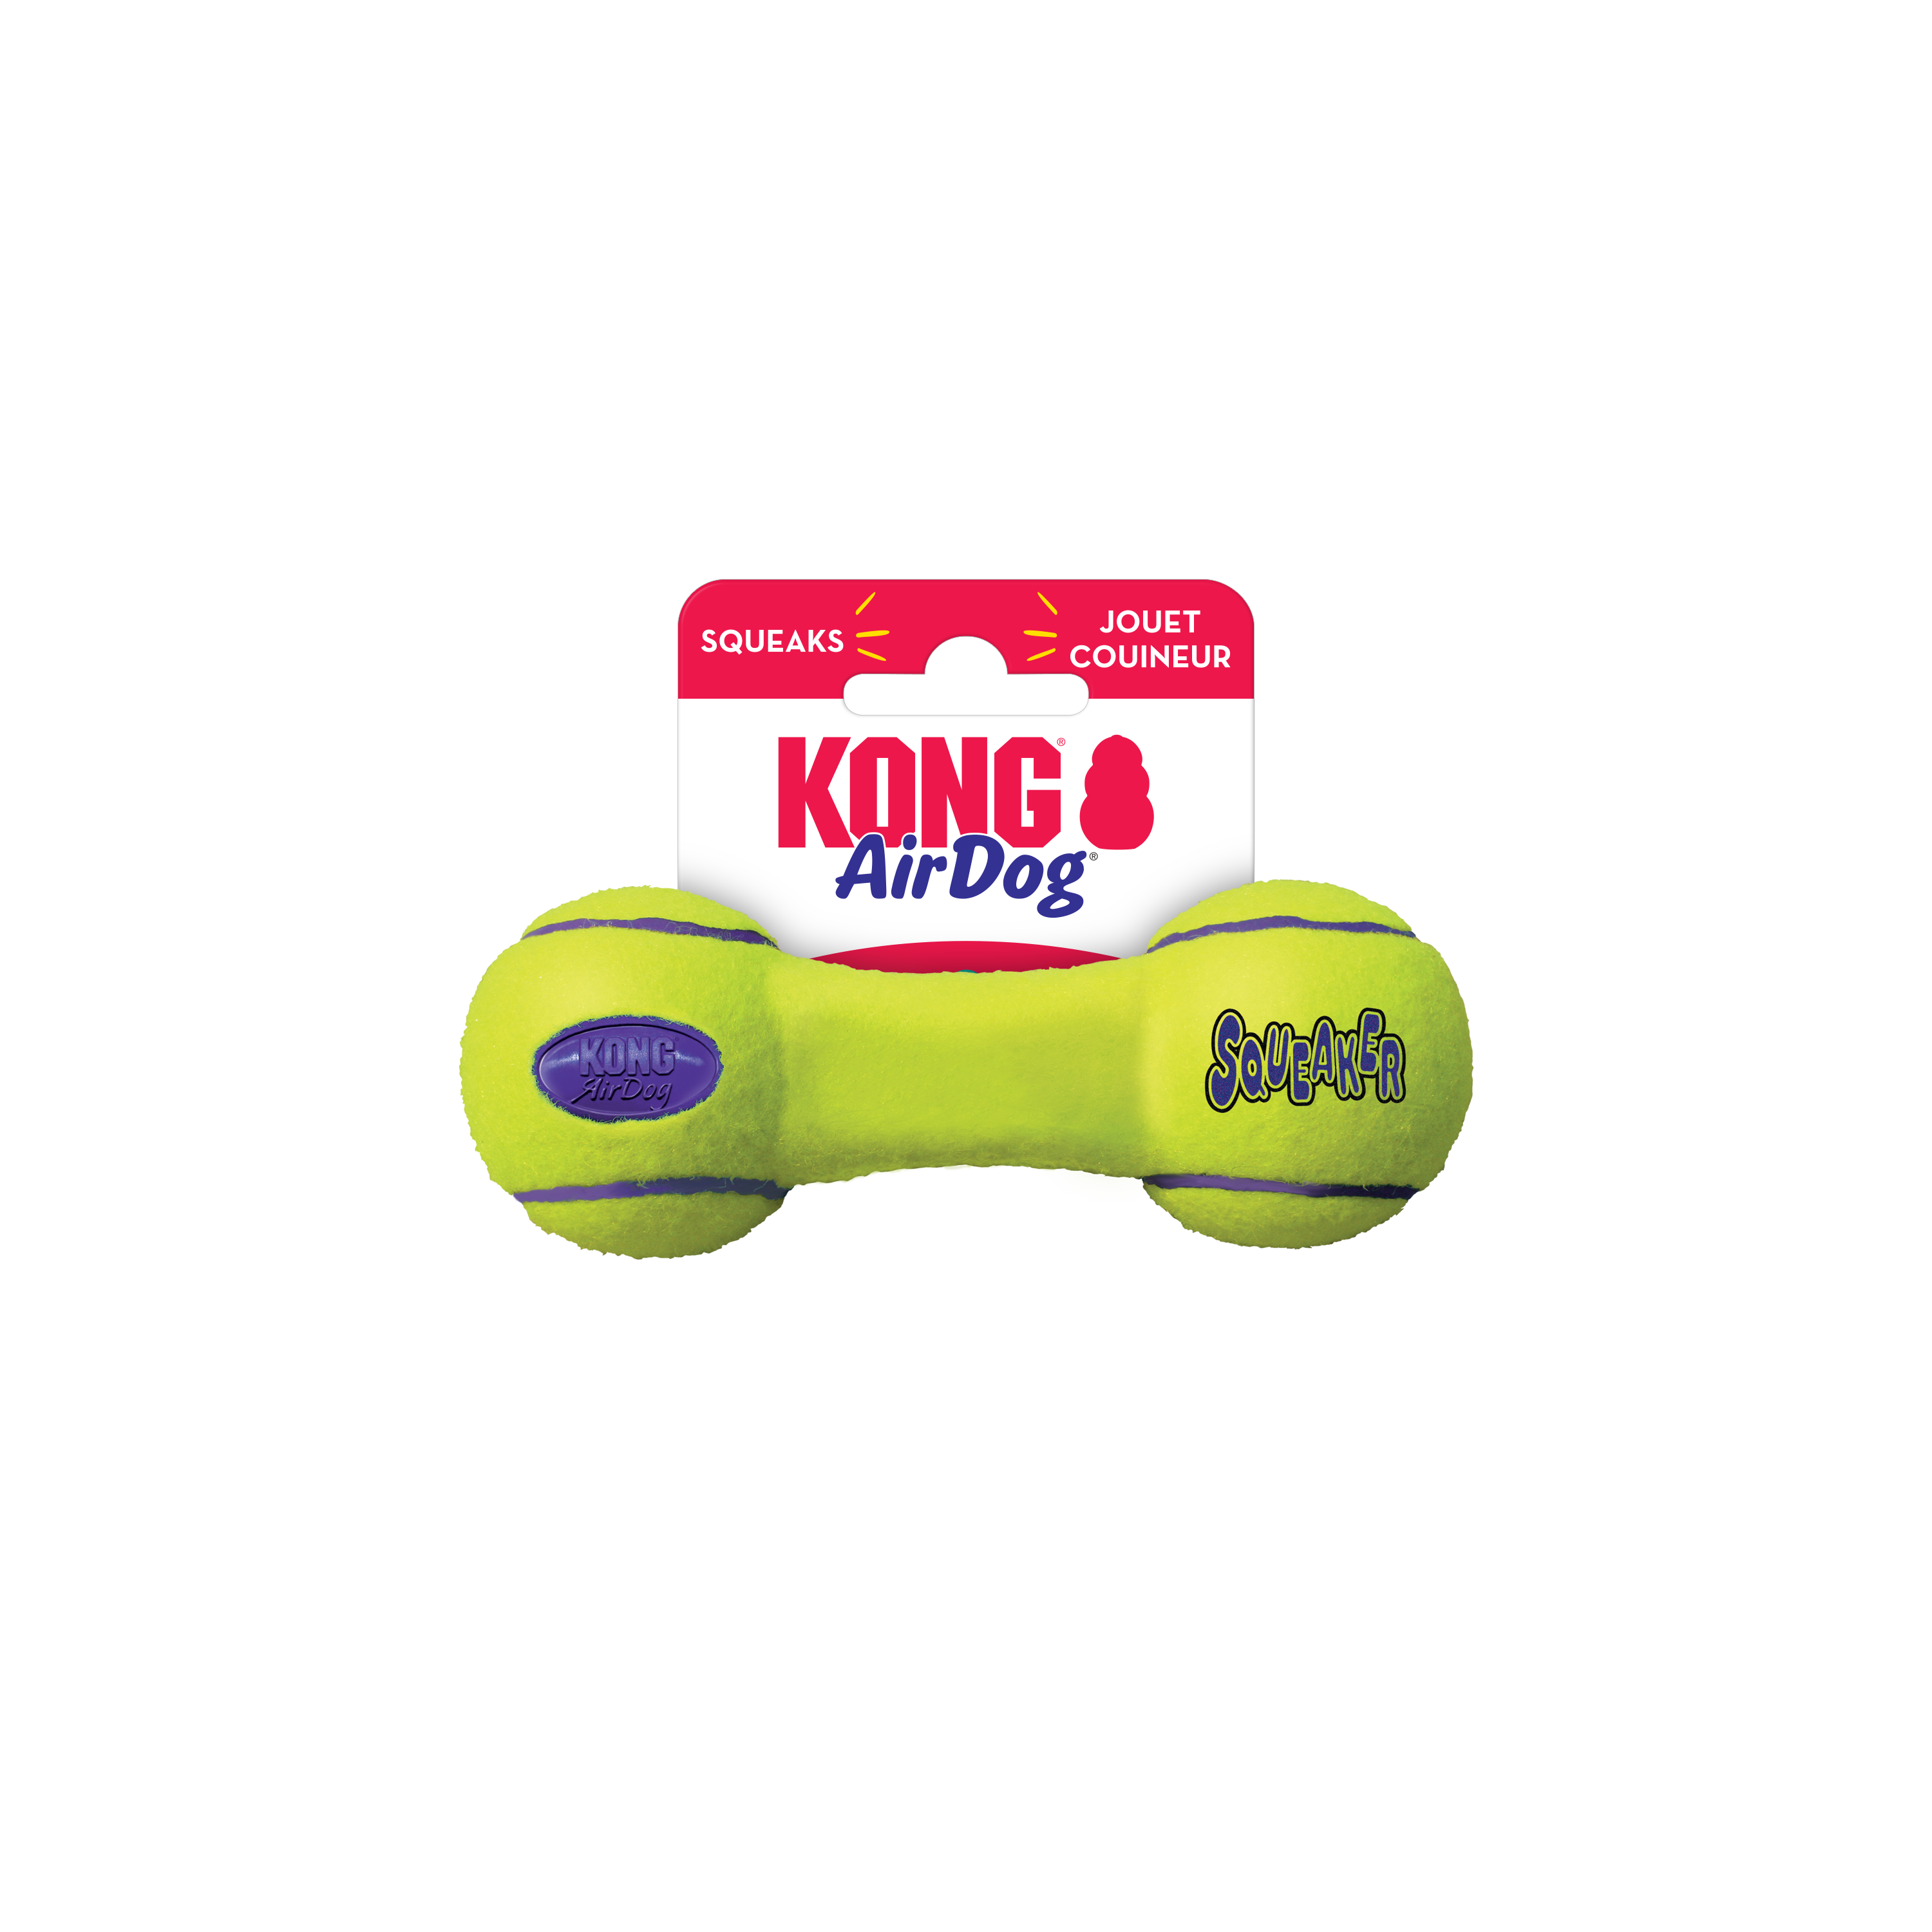 AirDog Squeaker Dumbbell onpack product image